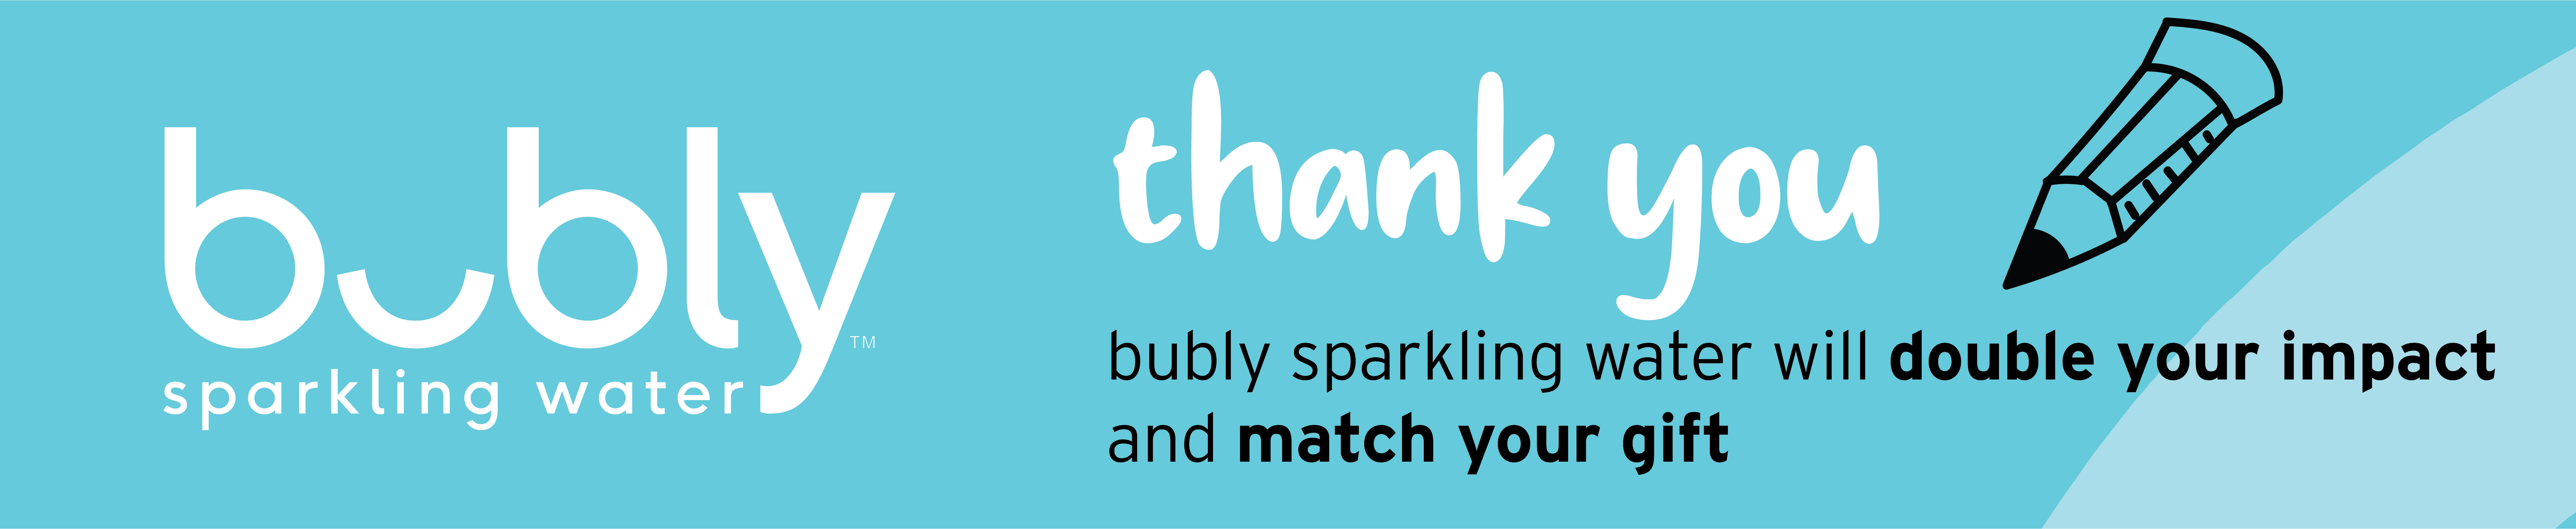 Adopt a Classroom Matching Partner bubly sparkling water